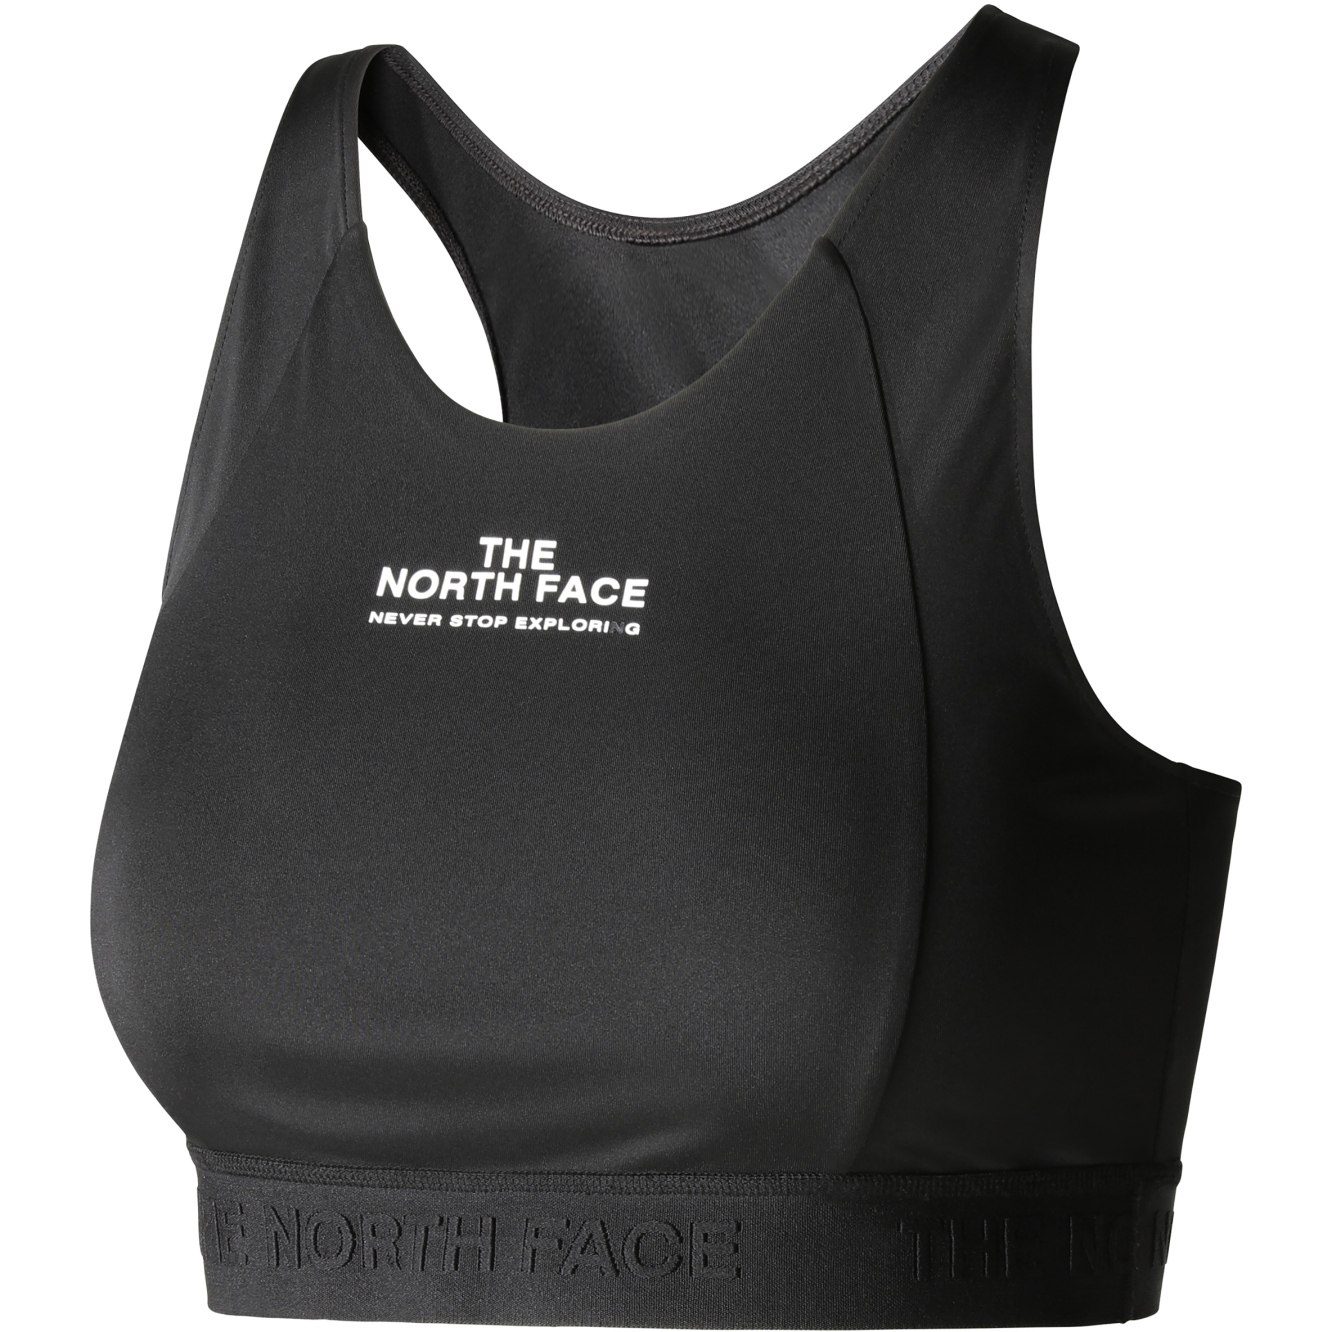 Productfoto van The North Face Mountain Athletics Sport-BH Dames - TNF Black